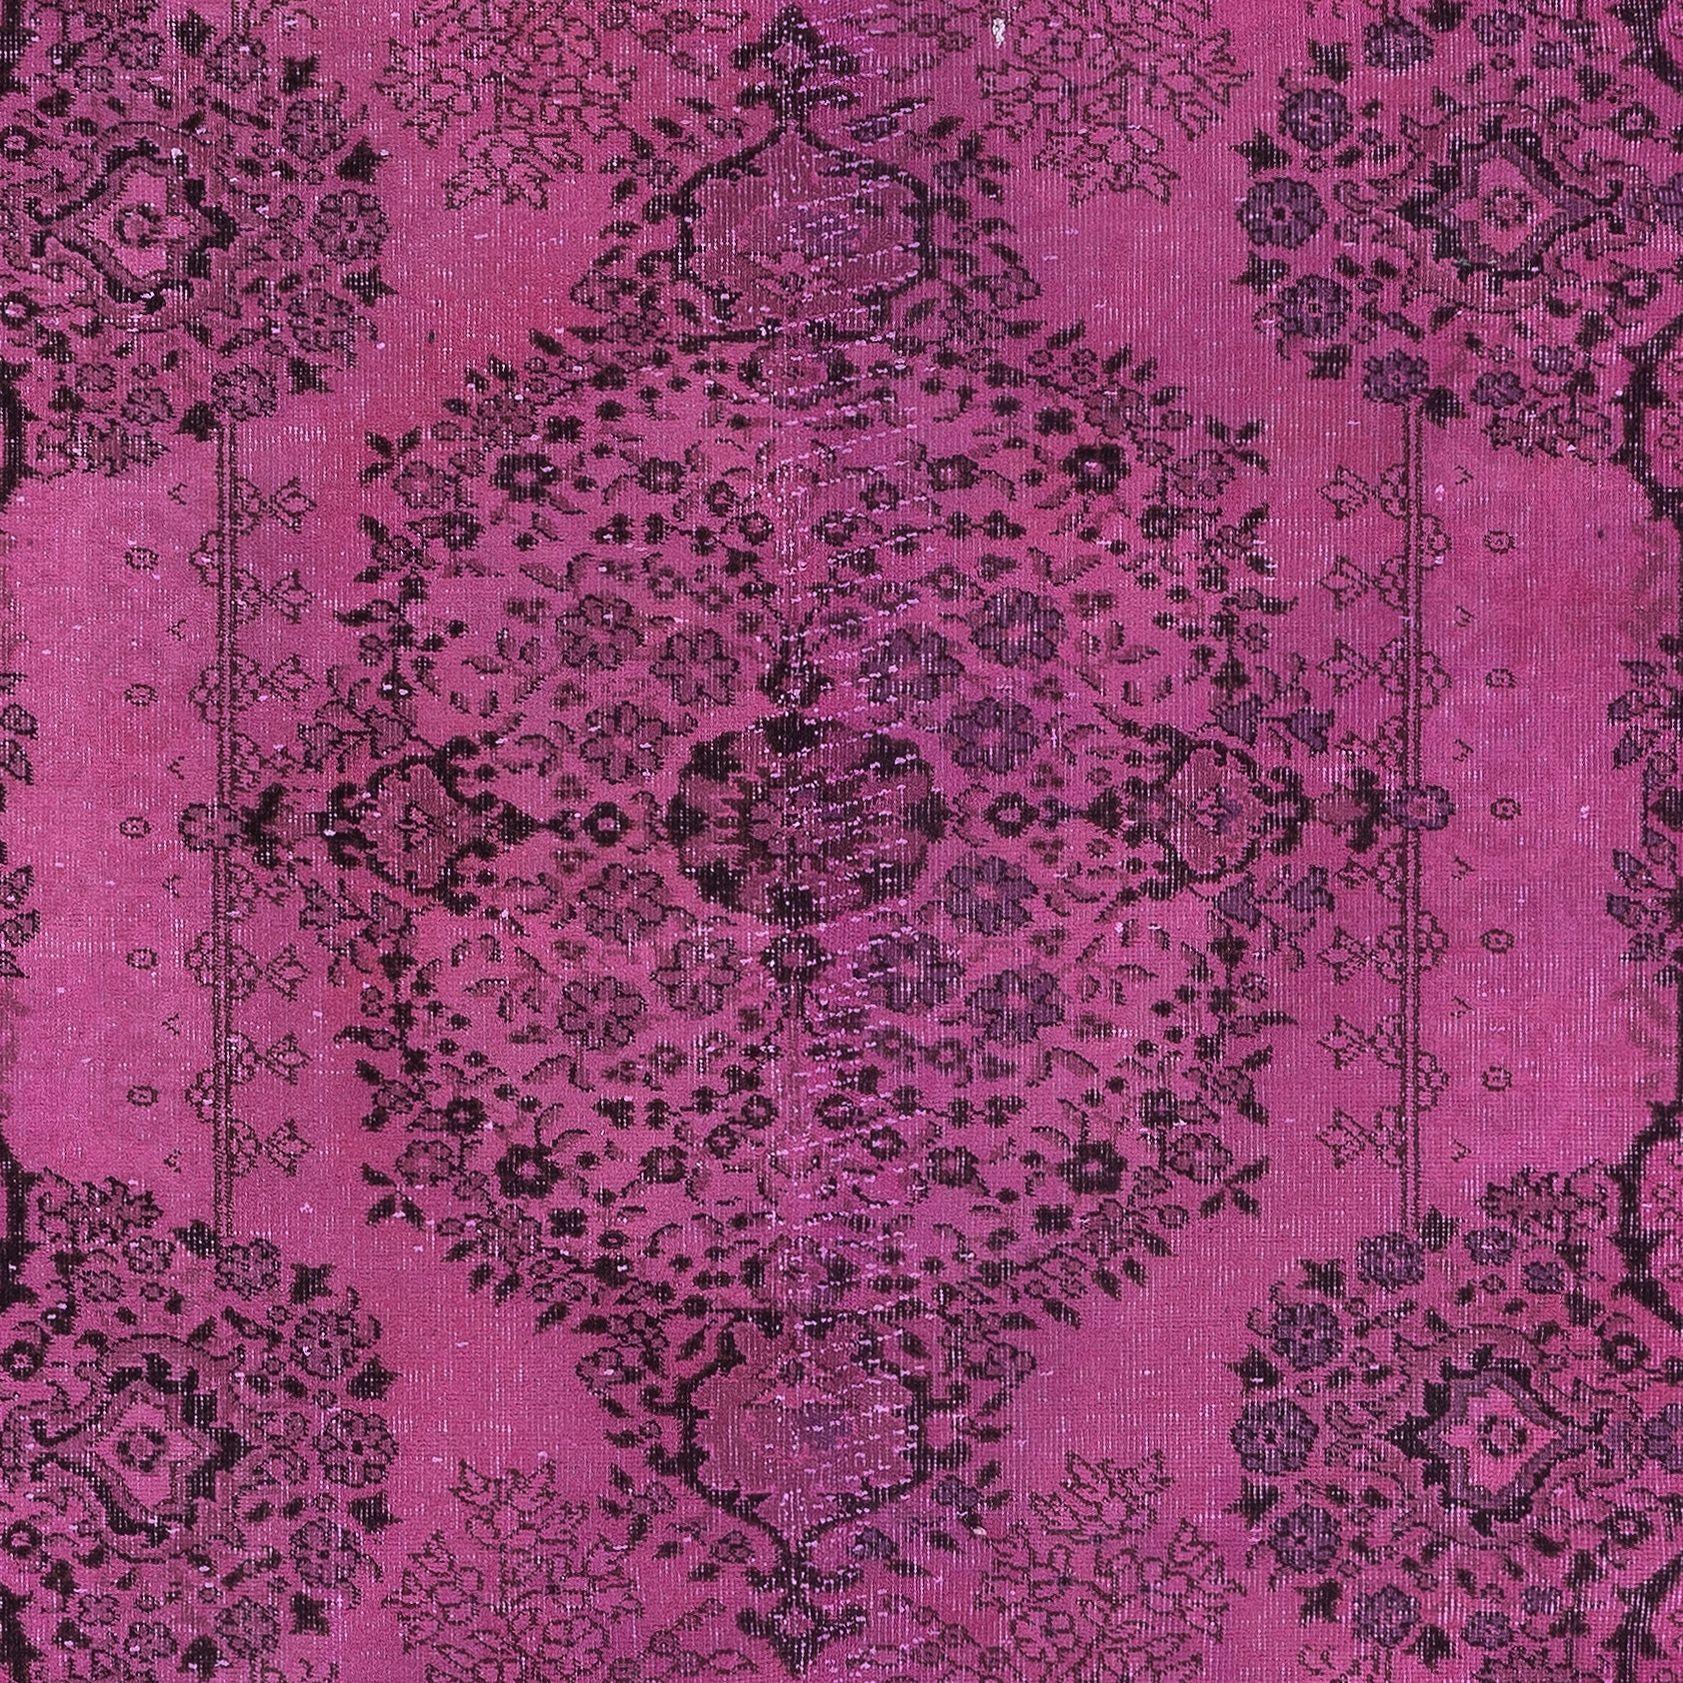 5.3x8.5 Ft Decorative Pink Area Rug for Modern Interiors, Handknotted in Turkey In Good Condition For Sale In Philadelphia, PA